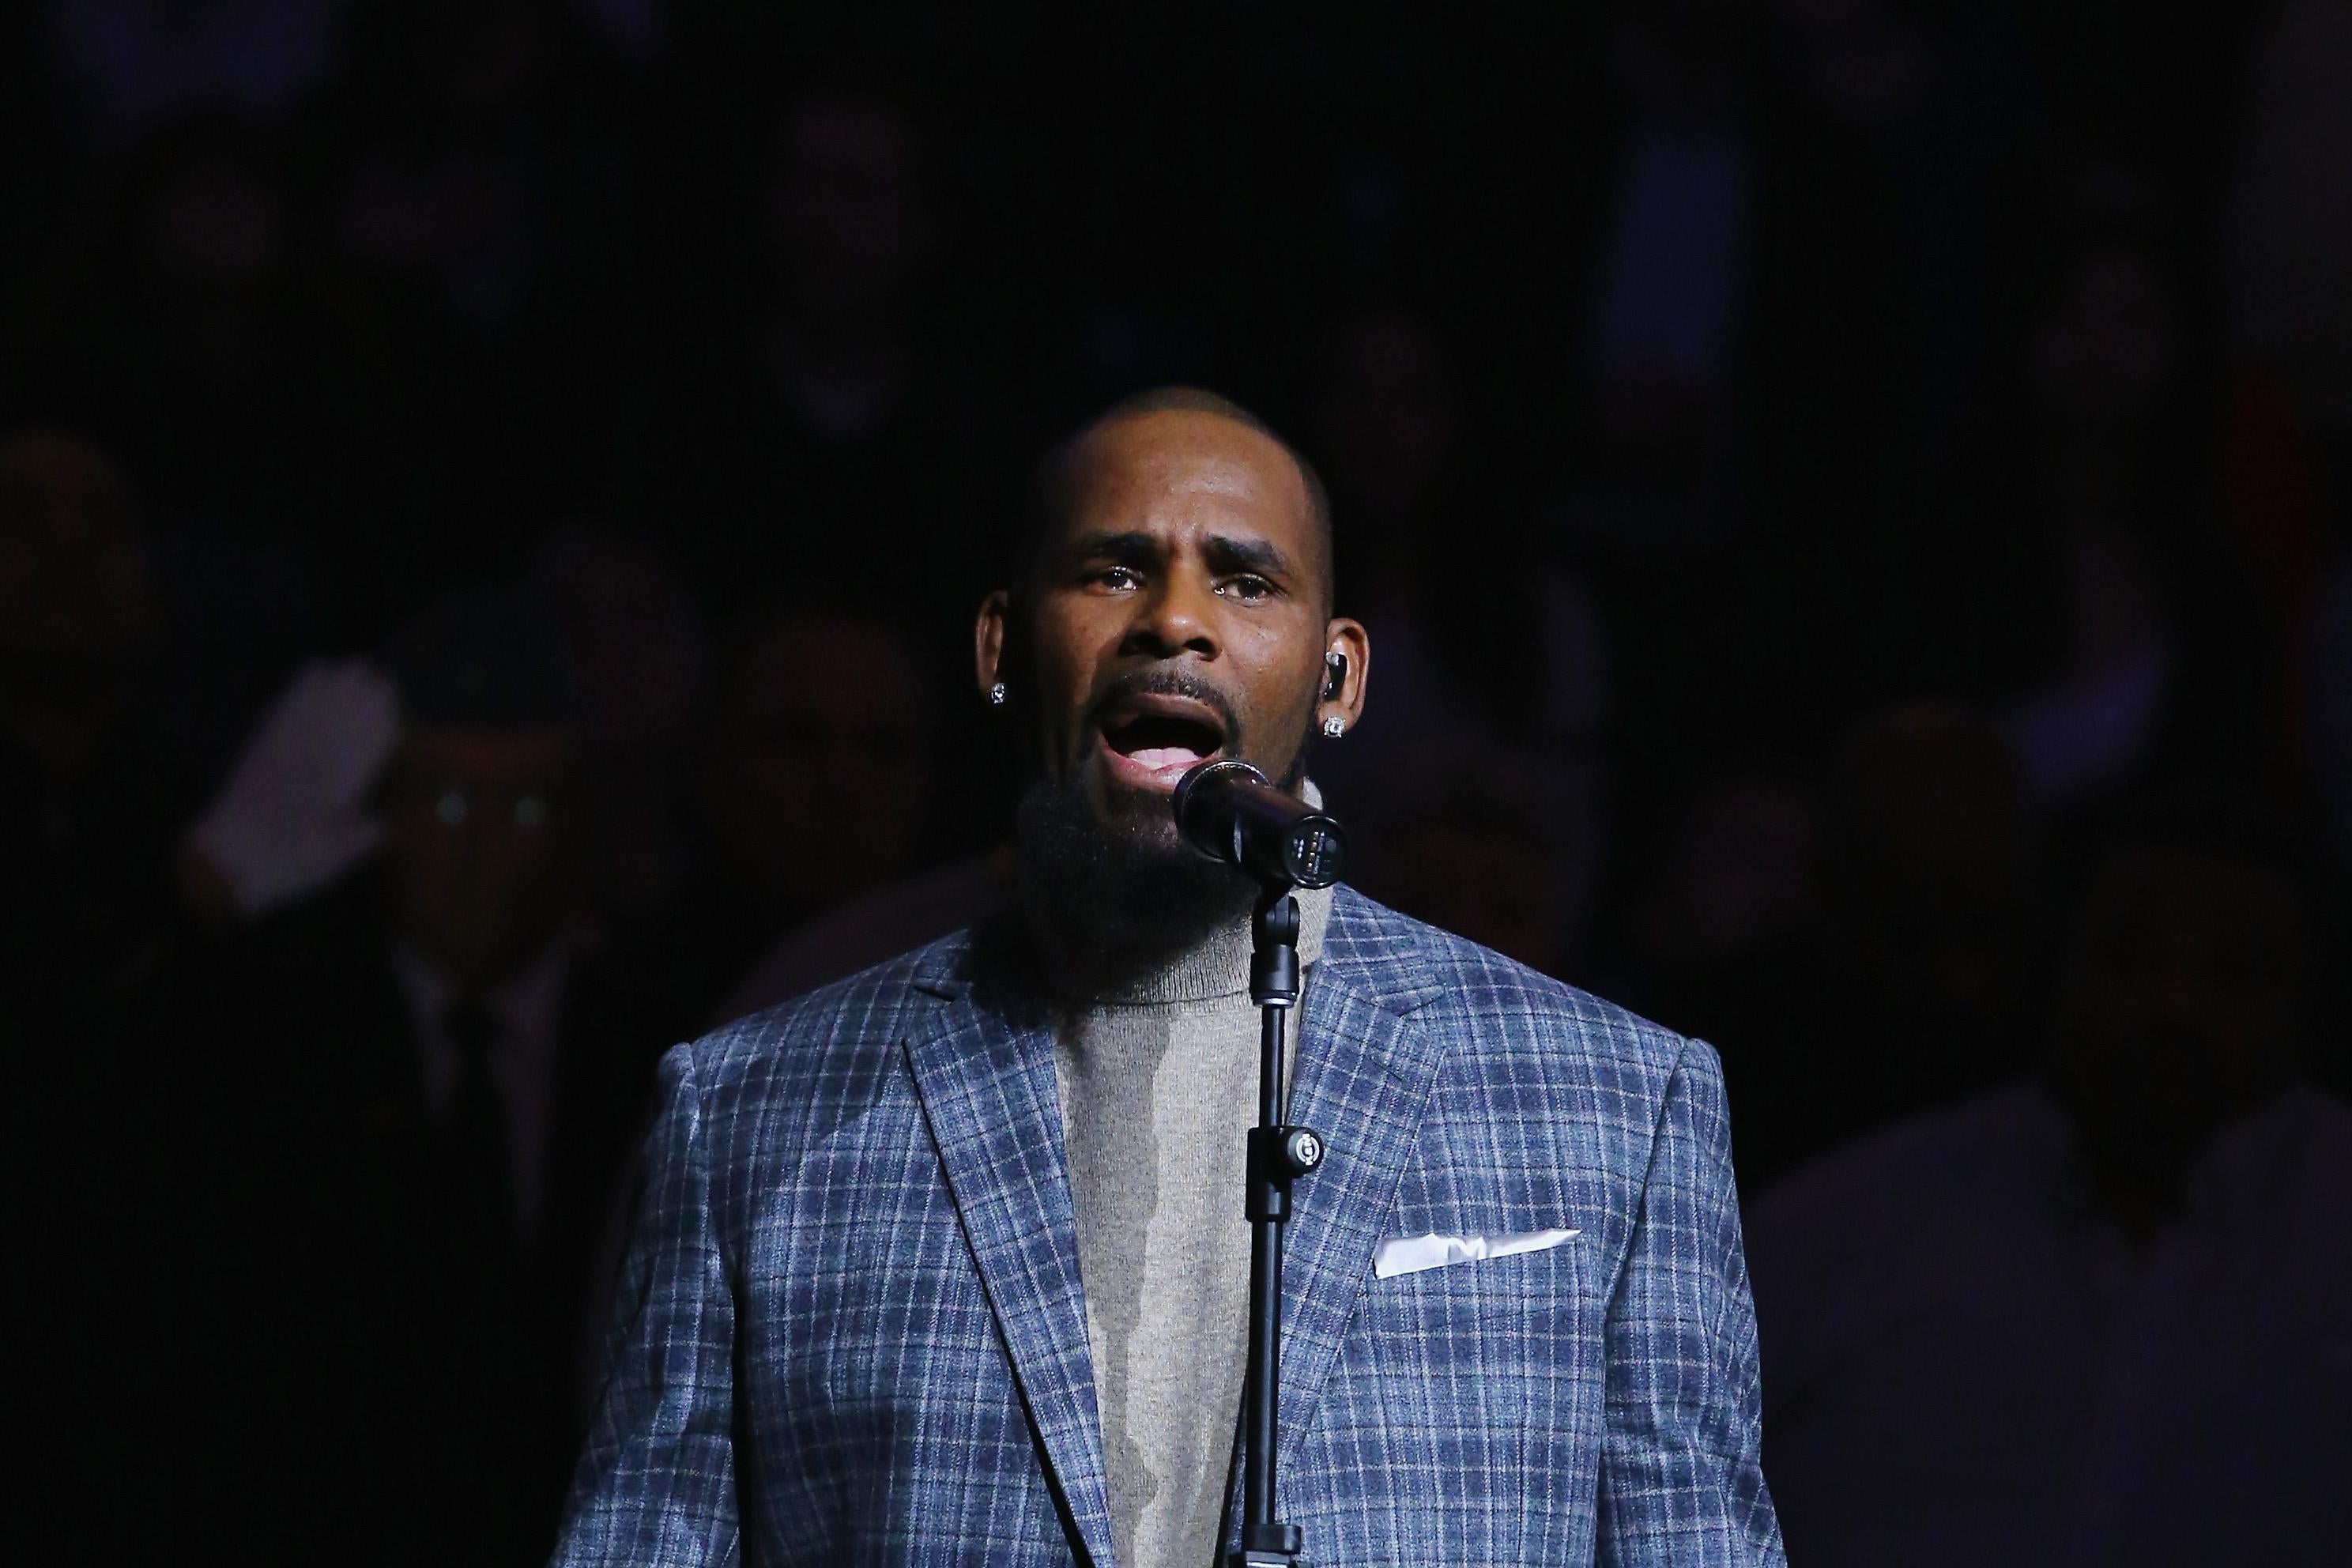 Singer R. Kelly sings the National anthem before the Brooklyn Nets vs the Atlanta Hawks  at The Barclays Center on November 17, 2015 in New York City.   NOTE TO USER: User expressly acknowledges and agrees that, by downloading and or using this photograph, User is consenting to the terms and conditions of the Getty Images License Agreement.